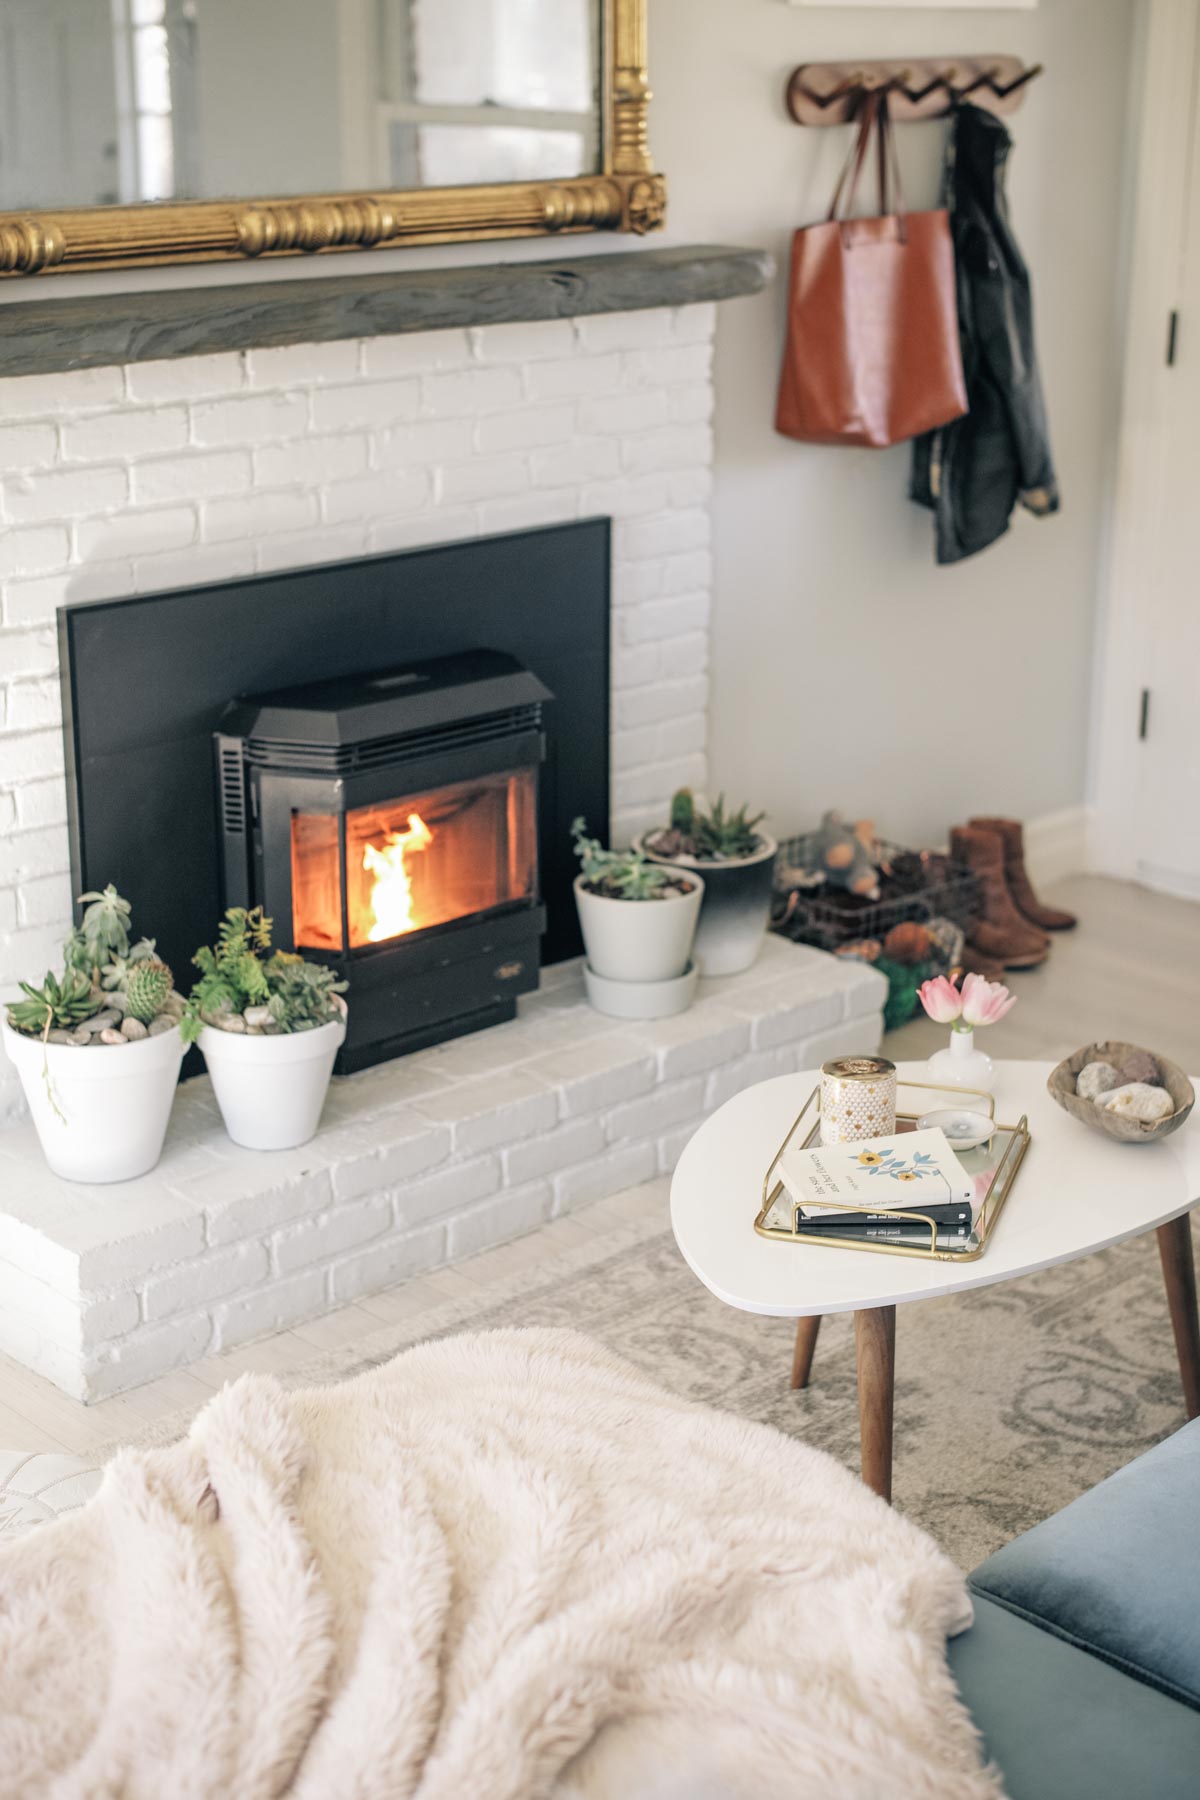 Jess Ann Kirby's home renovations includes a white brick mantle and pellet stove